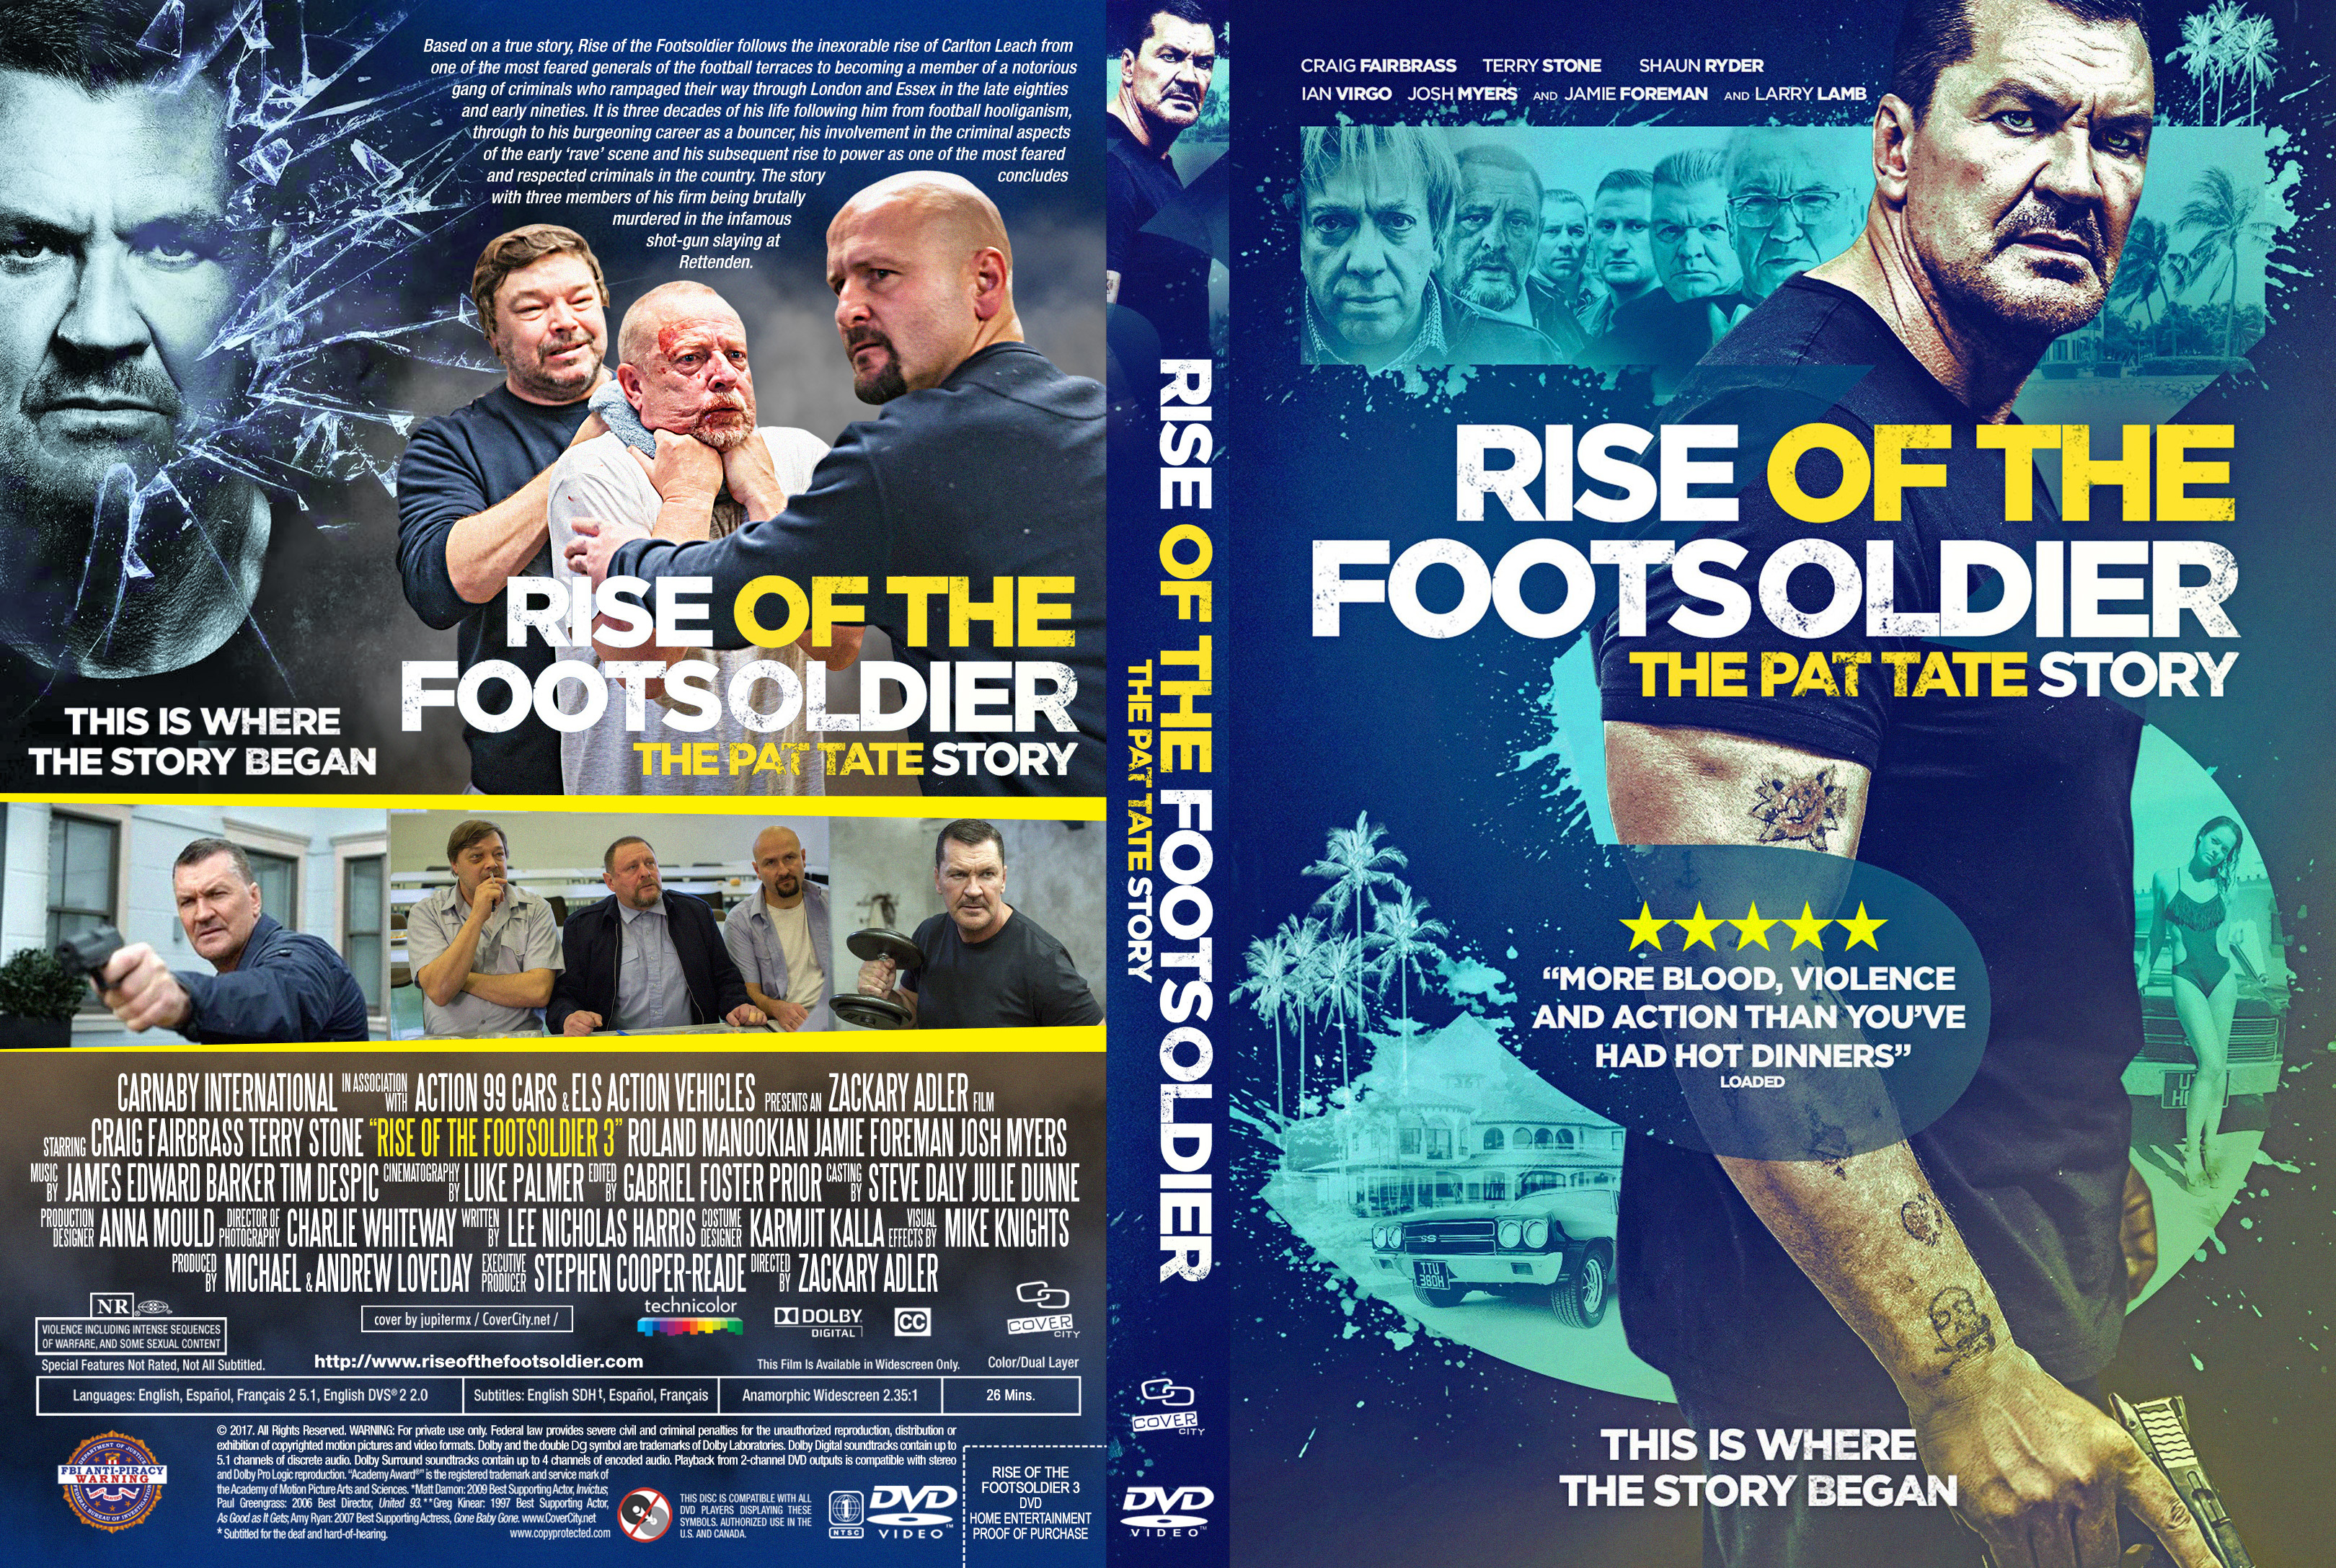 Rise of the Footsoldier 3 The Pat Tate Story DVD Cover 